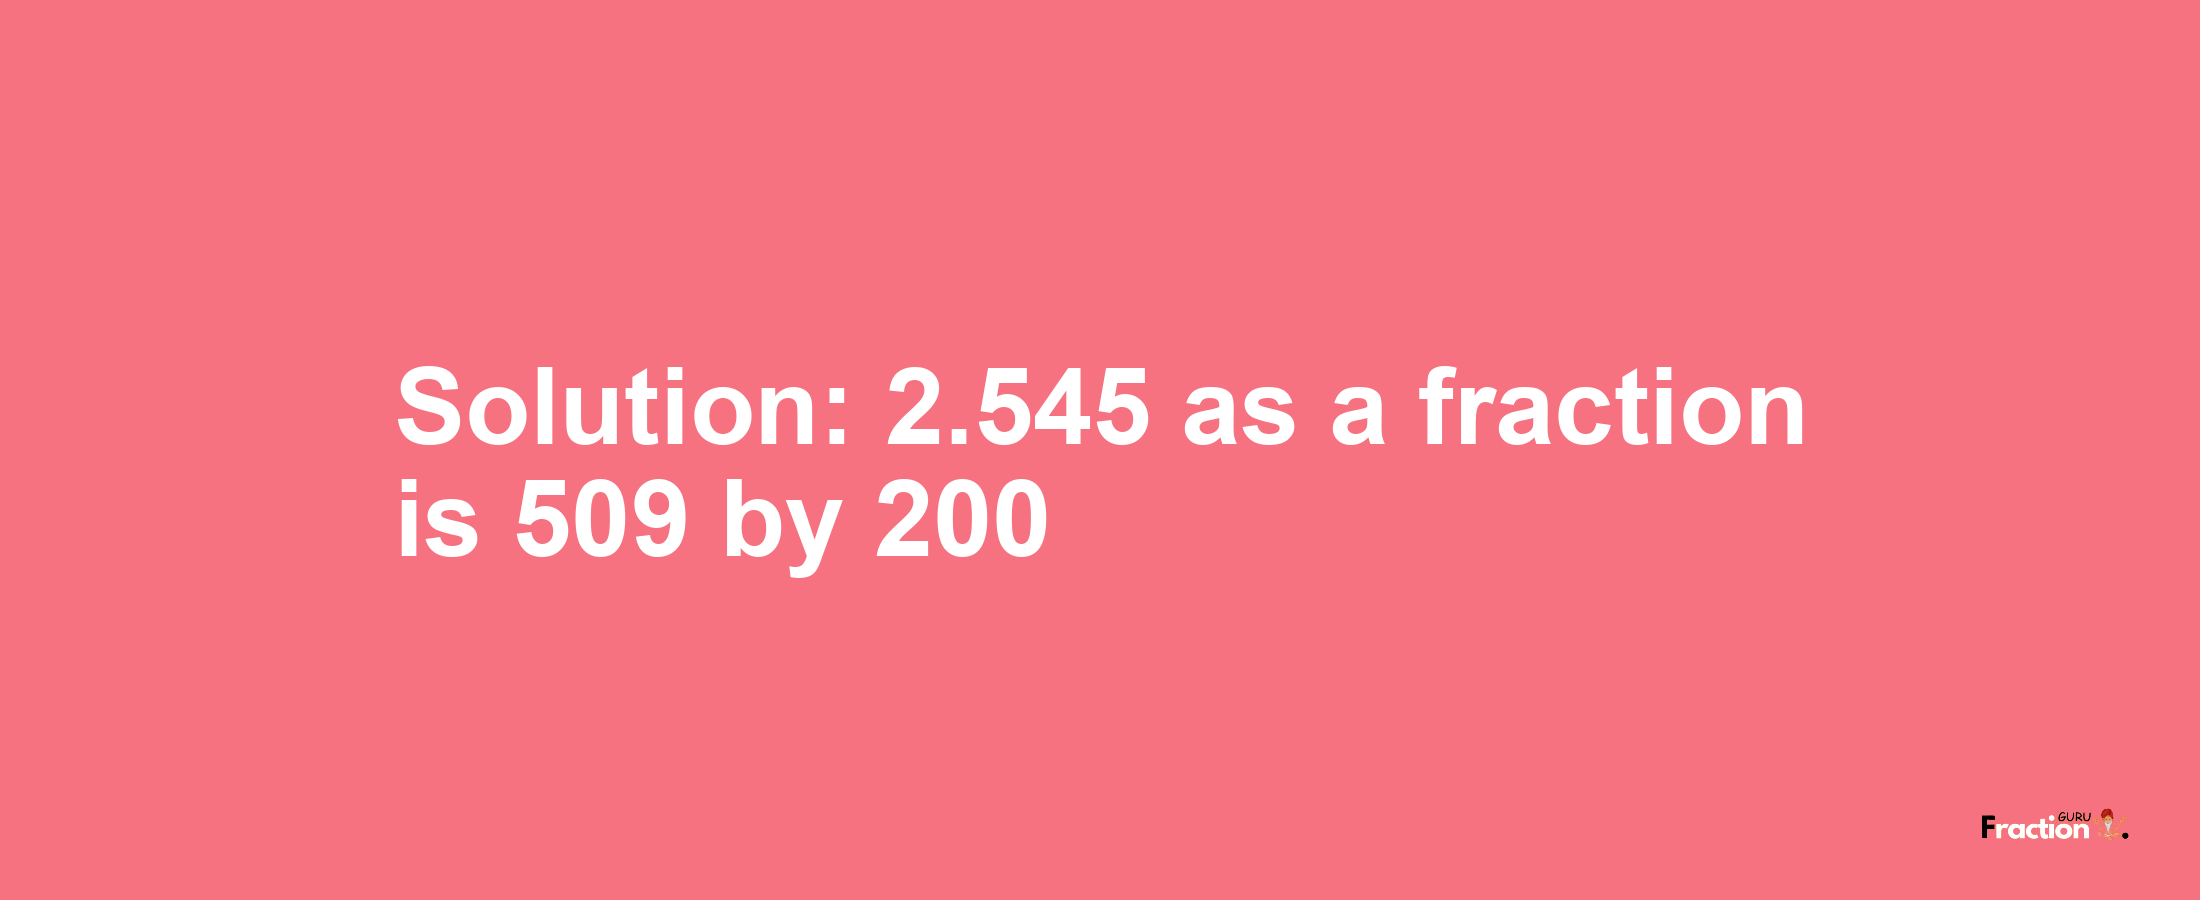 Solution:2.545 as a fraction is 509/200